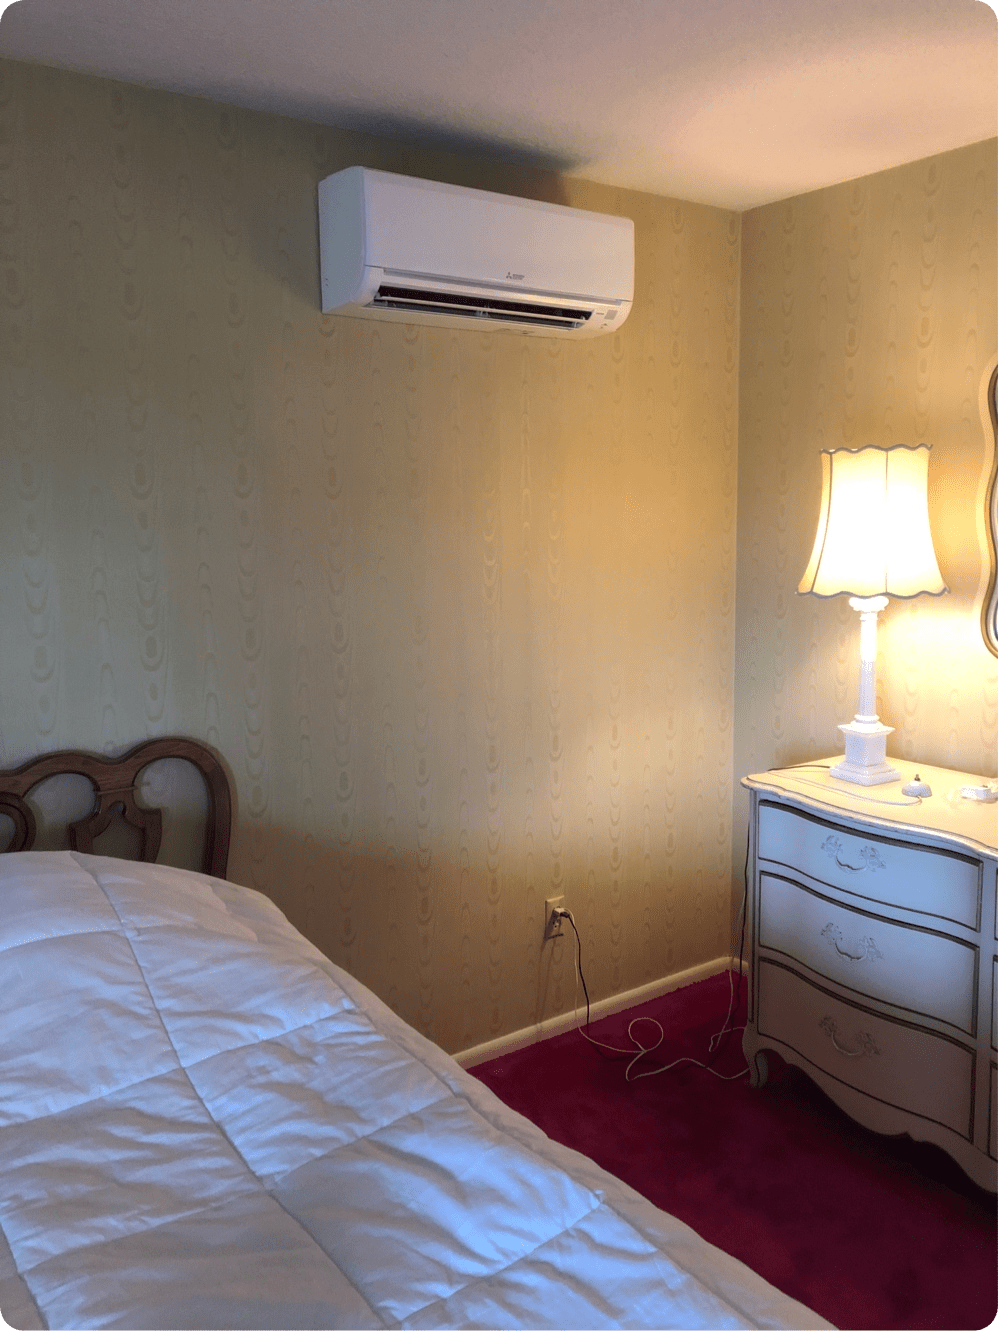 How Do I Heat A Bedroom That’s Too Cold In The Winter?